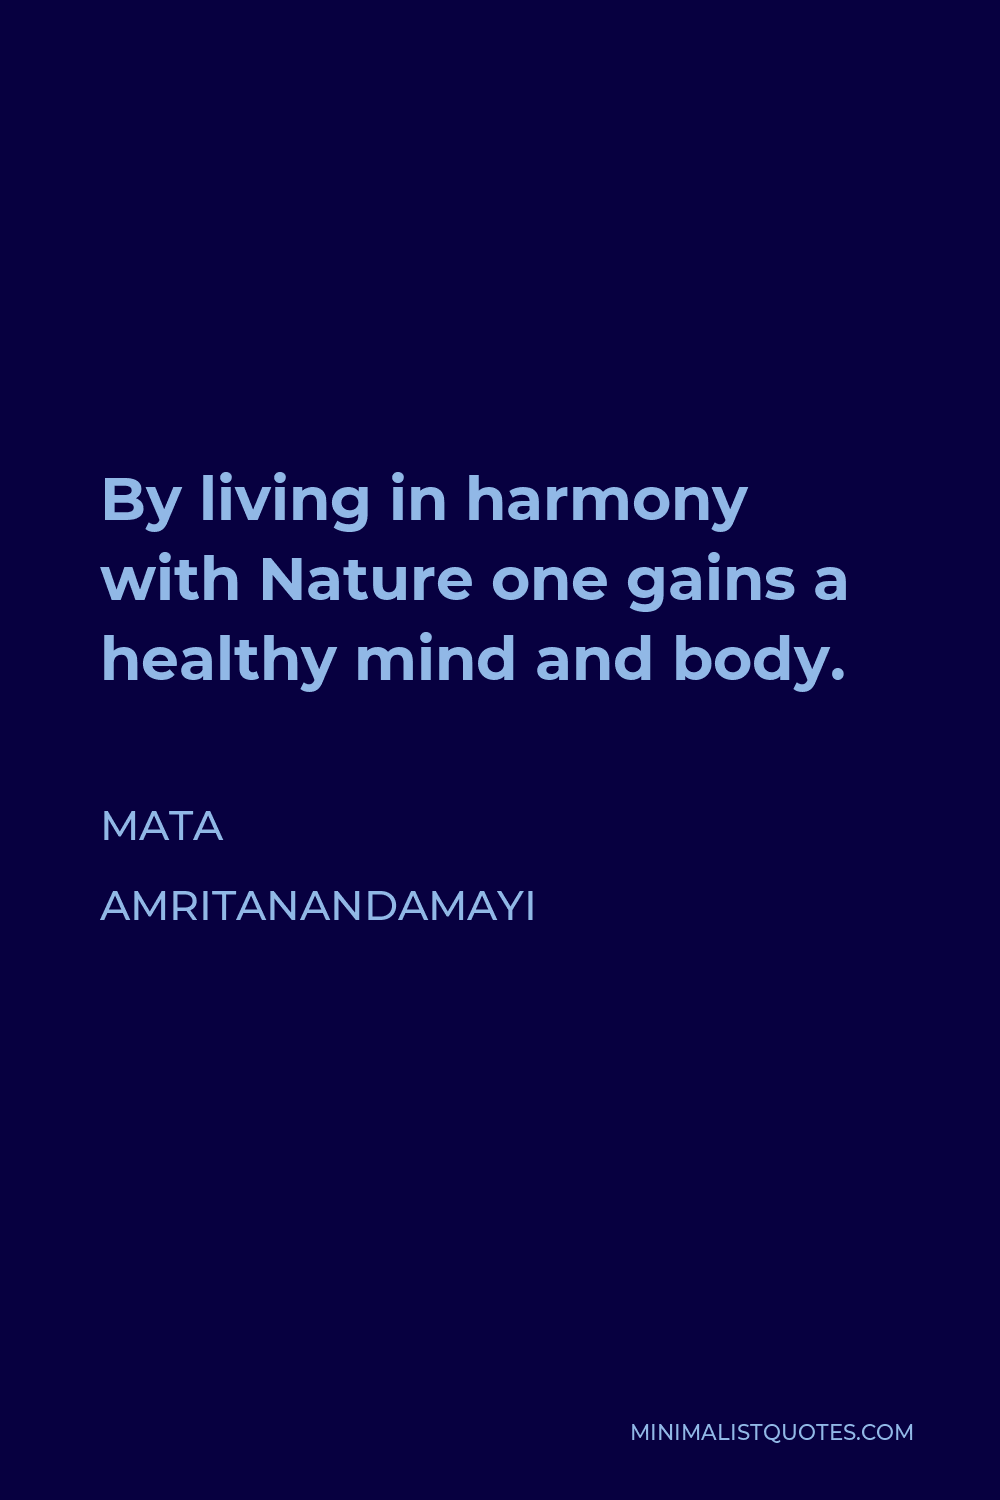 Mata Amritanandamayi Quote - By living in harmony with Nature one gains a healthy mind and body.